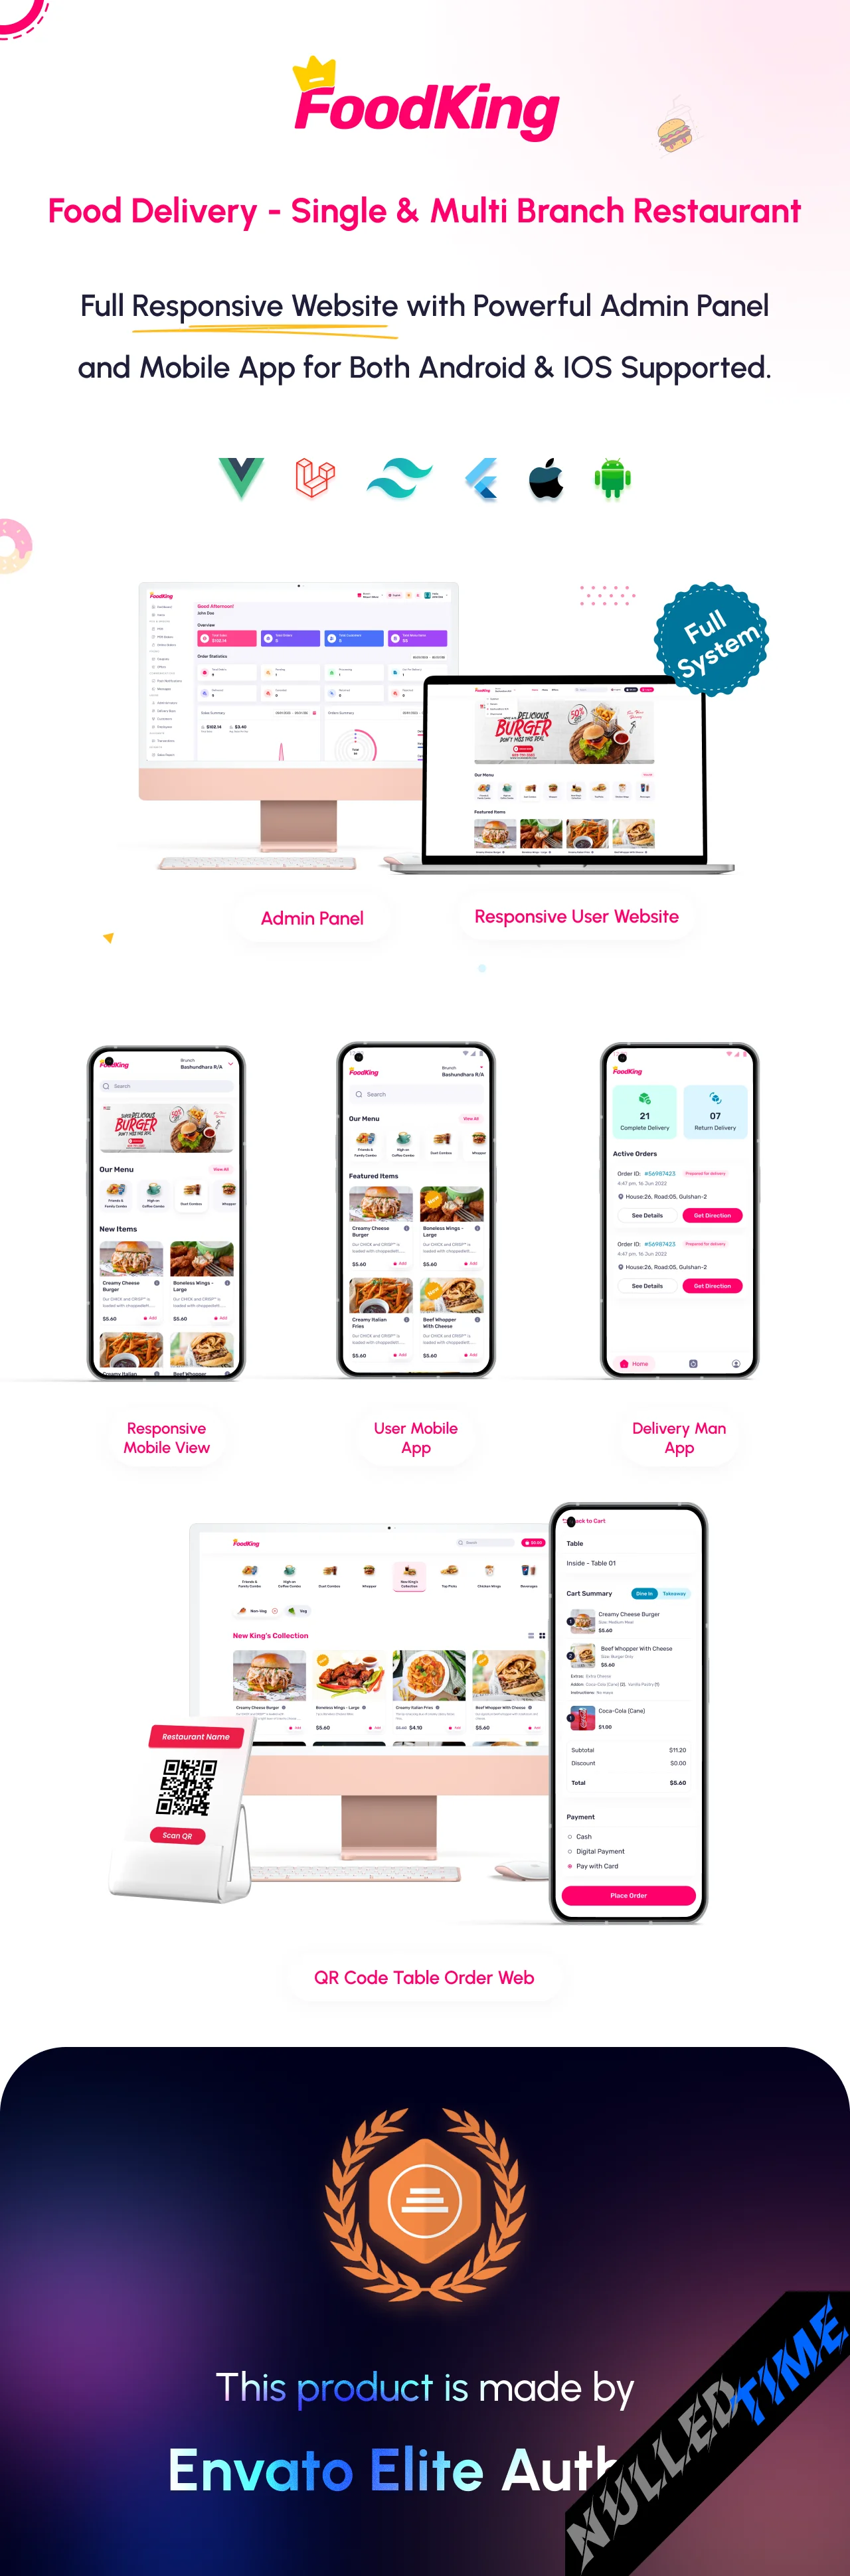 FoodKing  Restaurant Food Delivery System with Admin Panel  Delivery Man App | Restaurant POS-2.webp